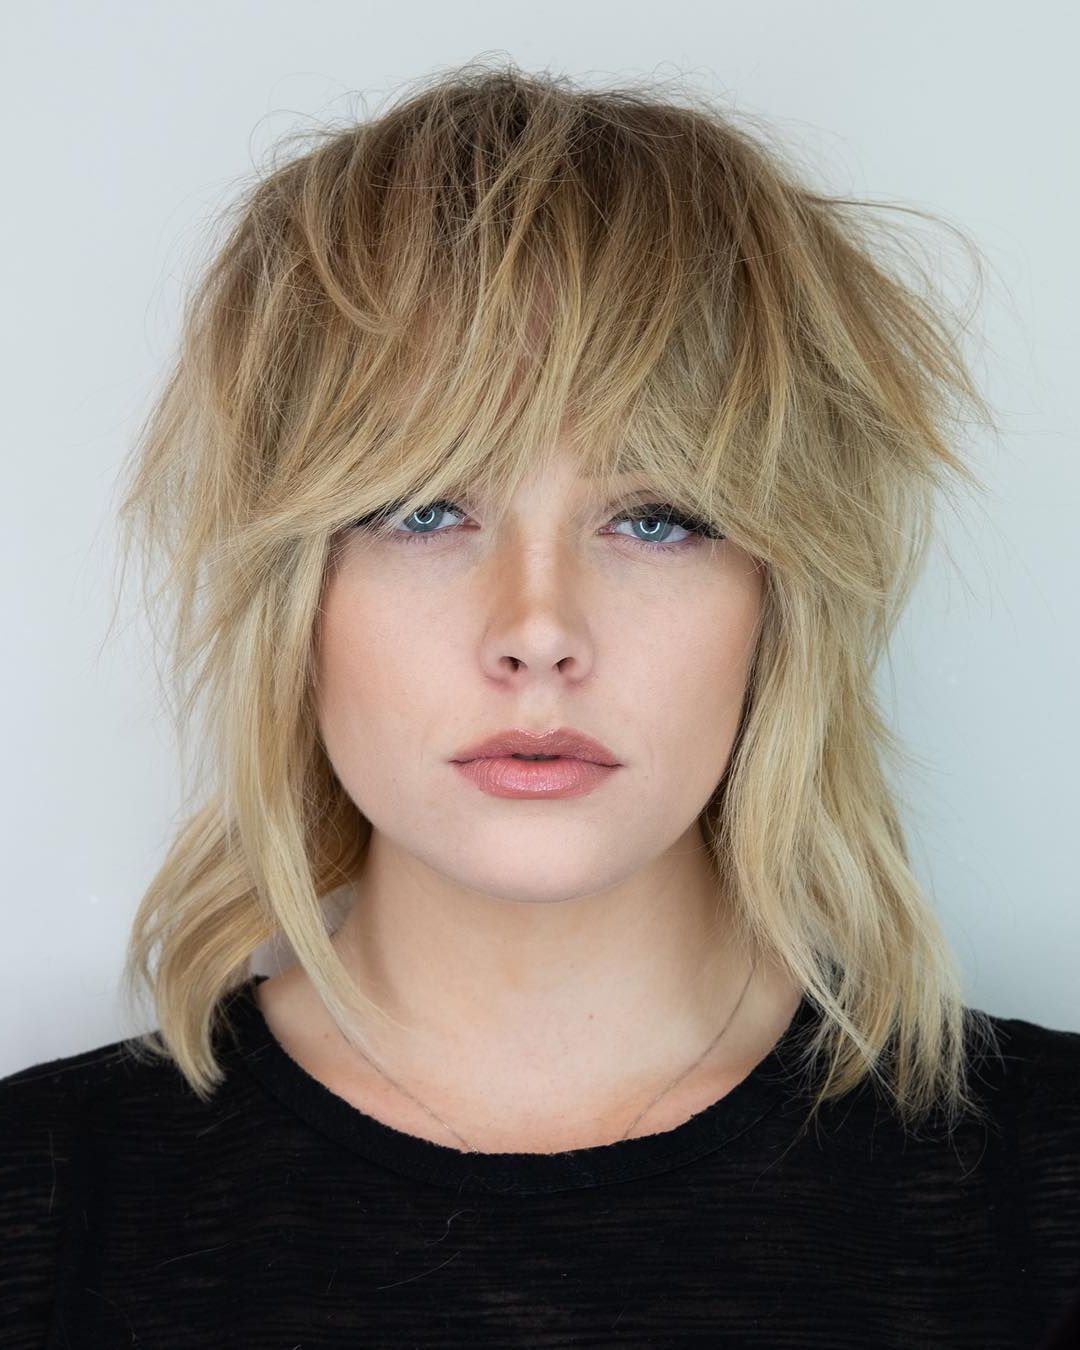 40 Modern Shag Haircuts For Women To Make A Splash Regarding Well Liked Short Shag Haircuts With Side Bangs (View 6 of 20)